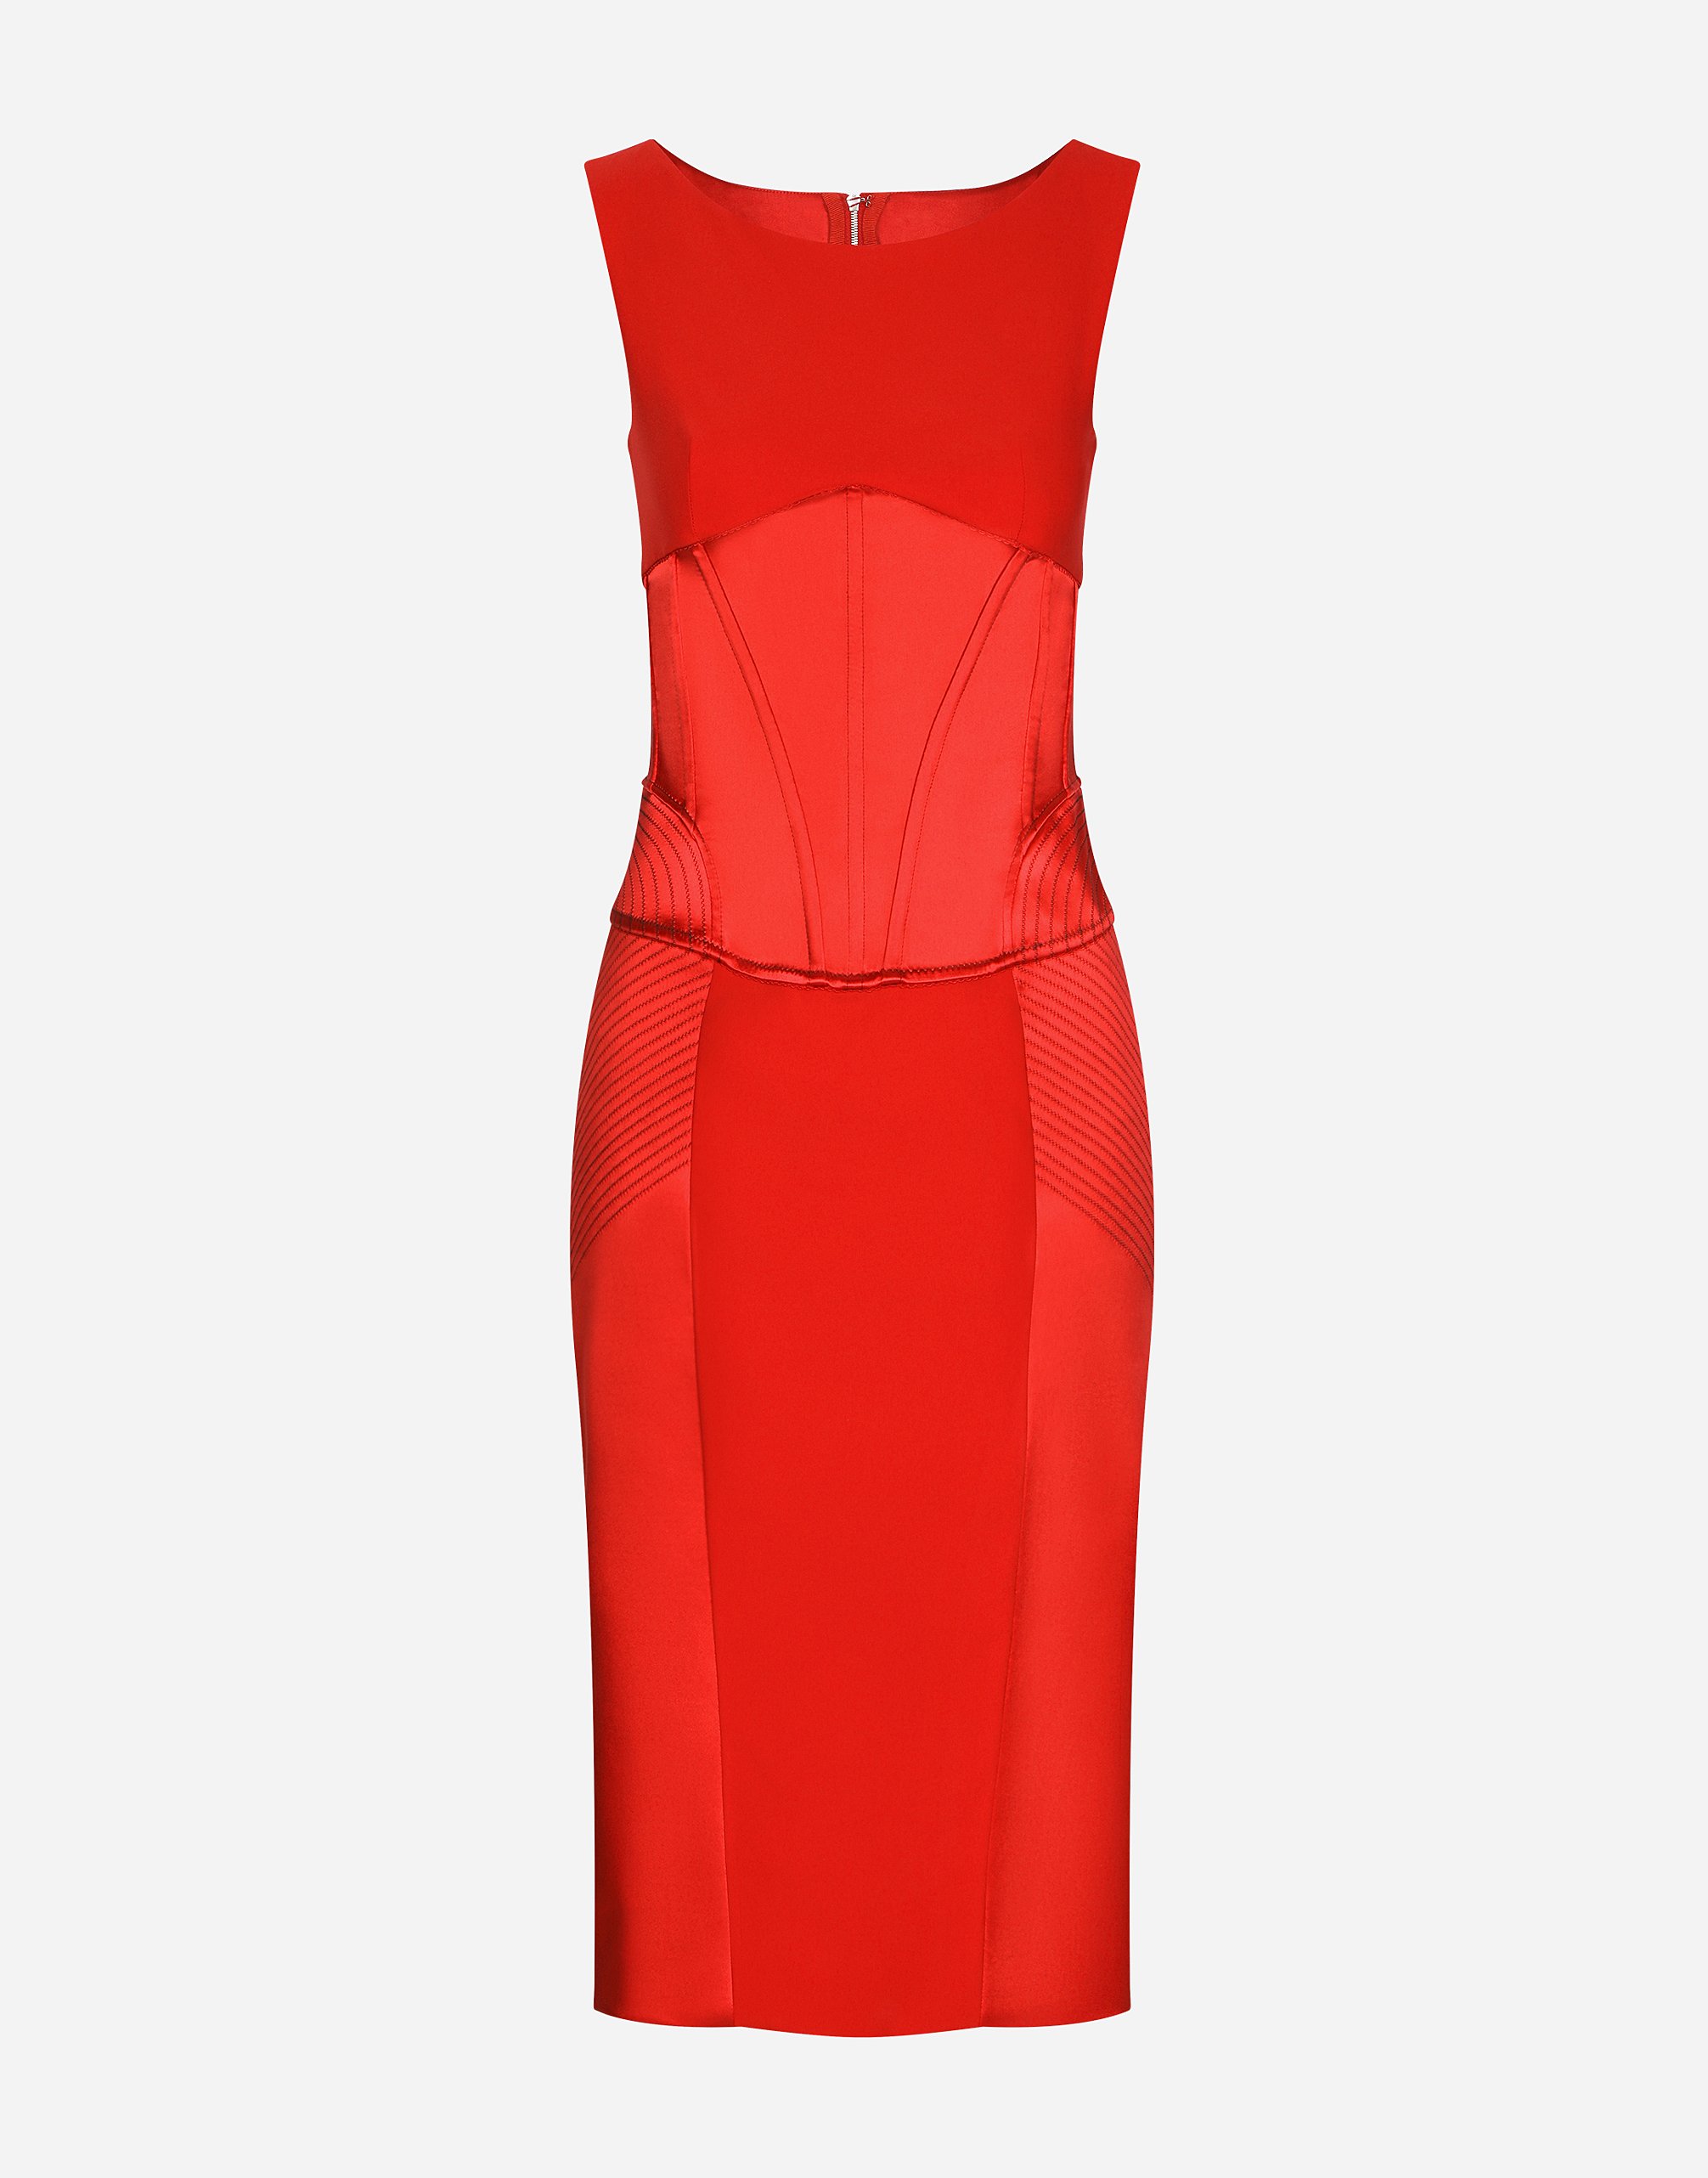 Dolce & Gabbana Satin And Cady Calf-length Dress In Red